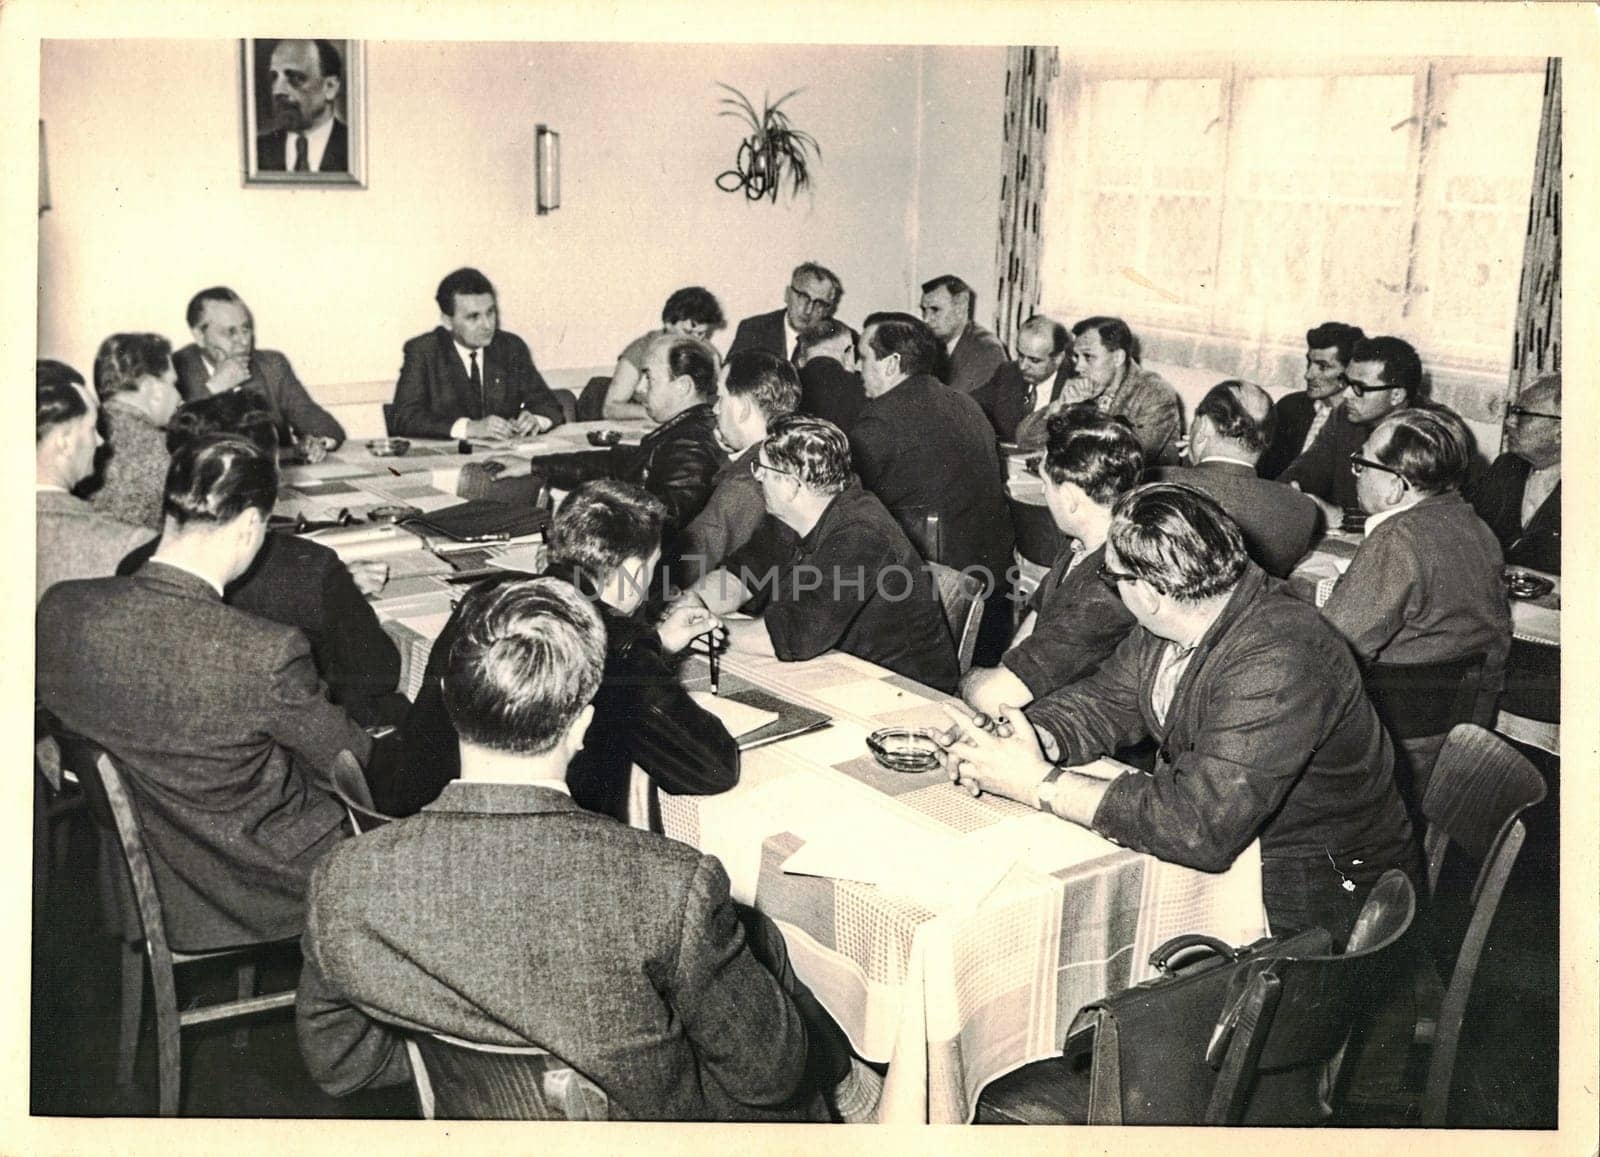 The retro photo shows company meeting in Communist bloc. Former East Germany, 1960s. by roman_nerud